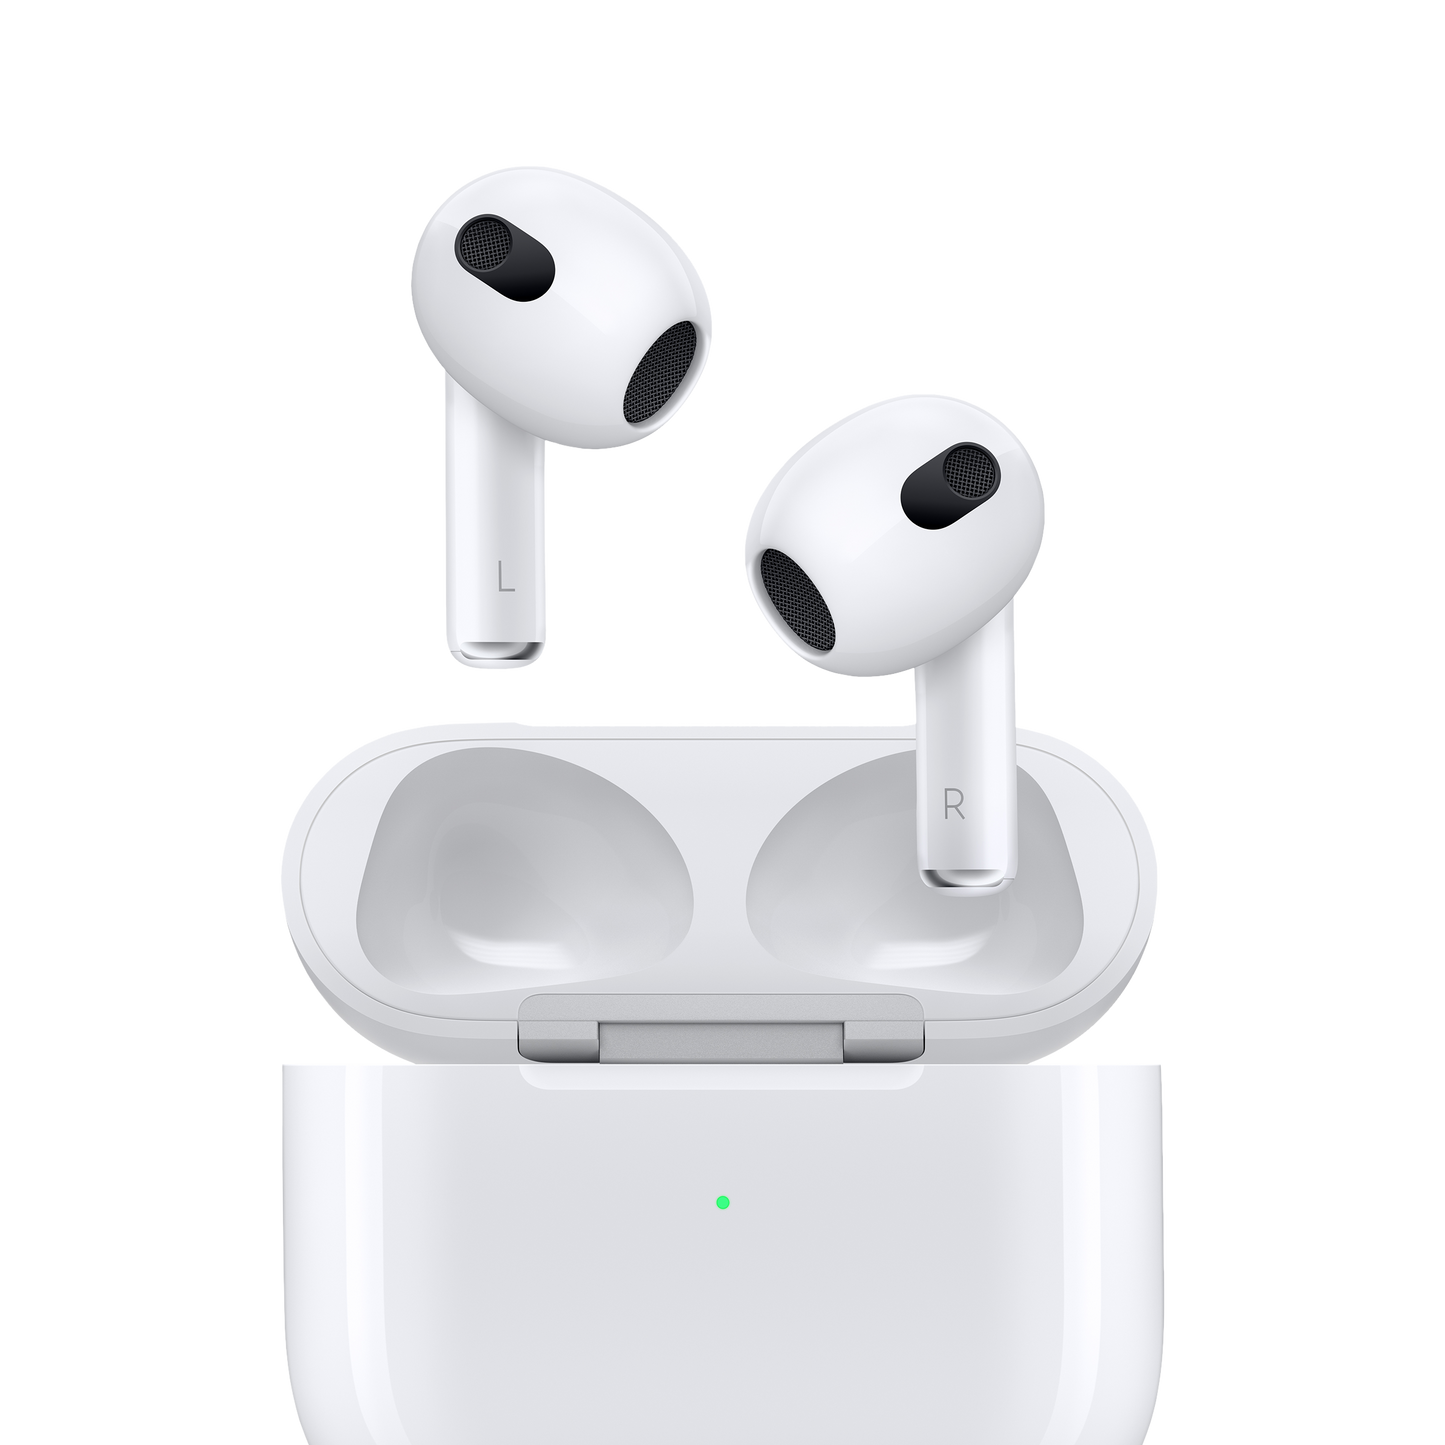 Image of Apple AirPods (3rd generation) with Lightning Charging Case, showcasing their wireless earbud design and compact charging case with Lightning connector. The AirPods are shown against a white background, highlighting their sleek appearance and magnetic charging contacts on the case